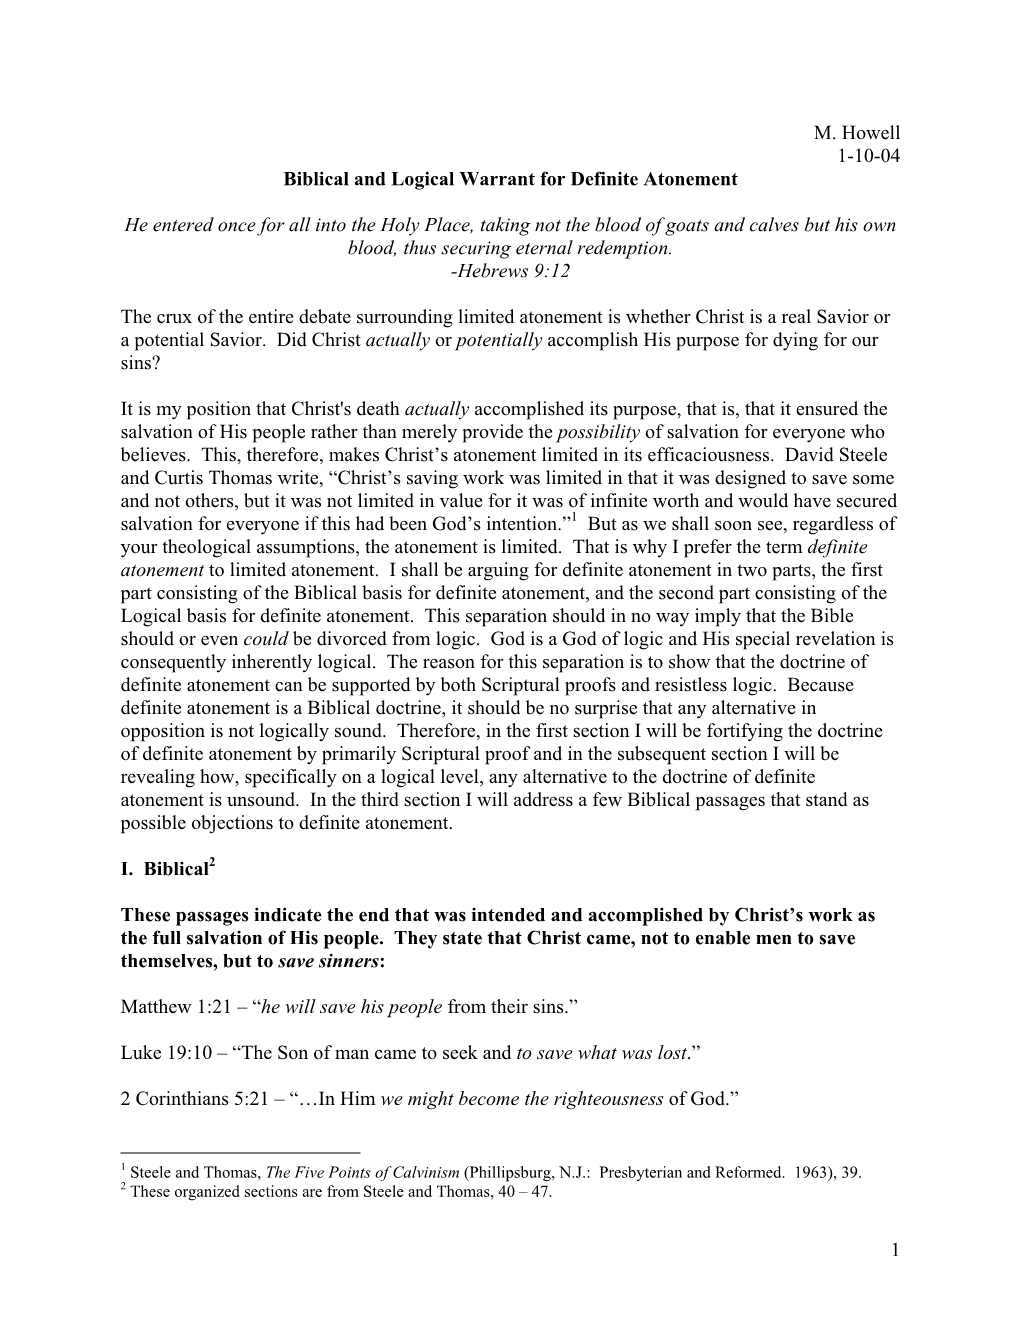 Biblical and Logical Warrant for Limited Atonement